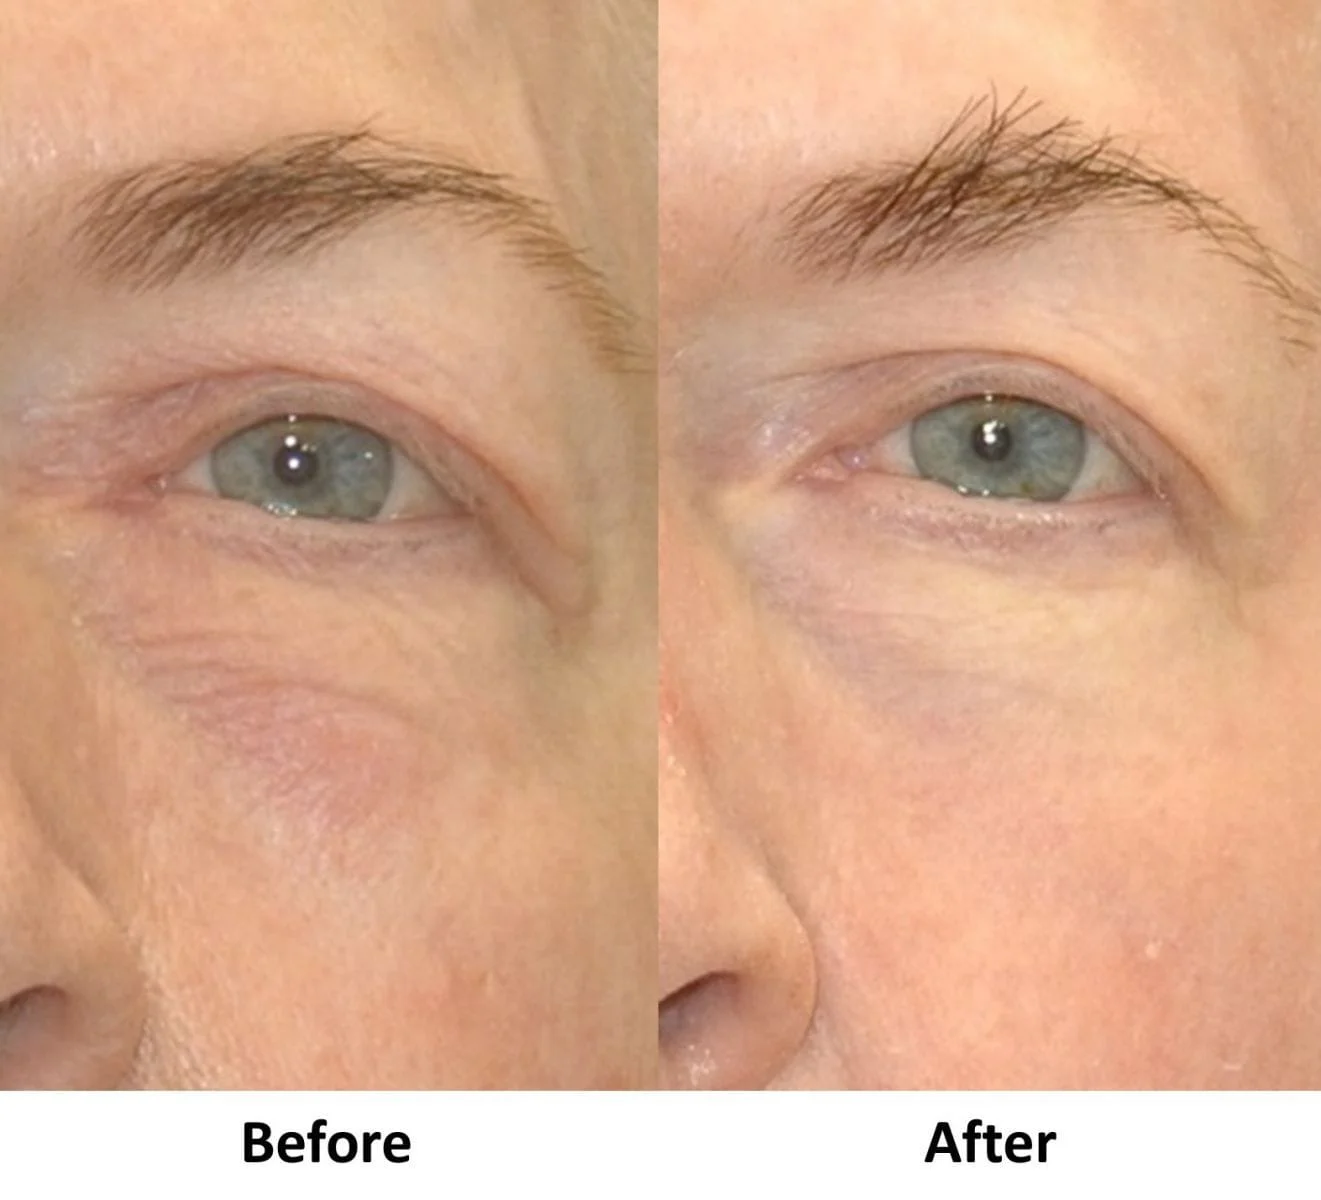 Before and After Care Instructions for Fractional CO2 Laser Treatment